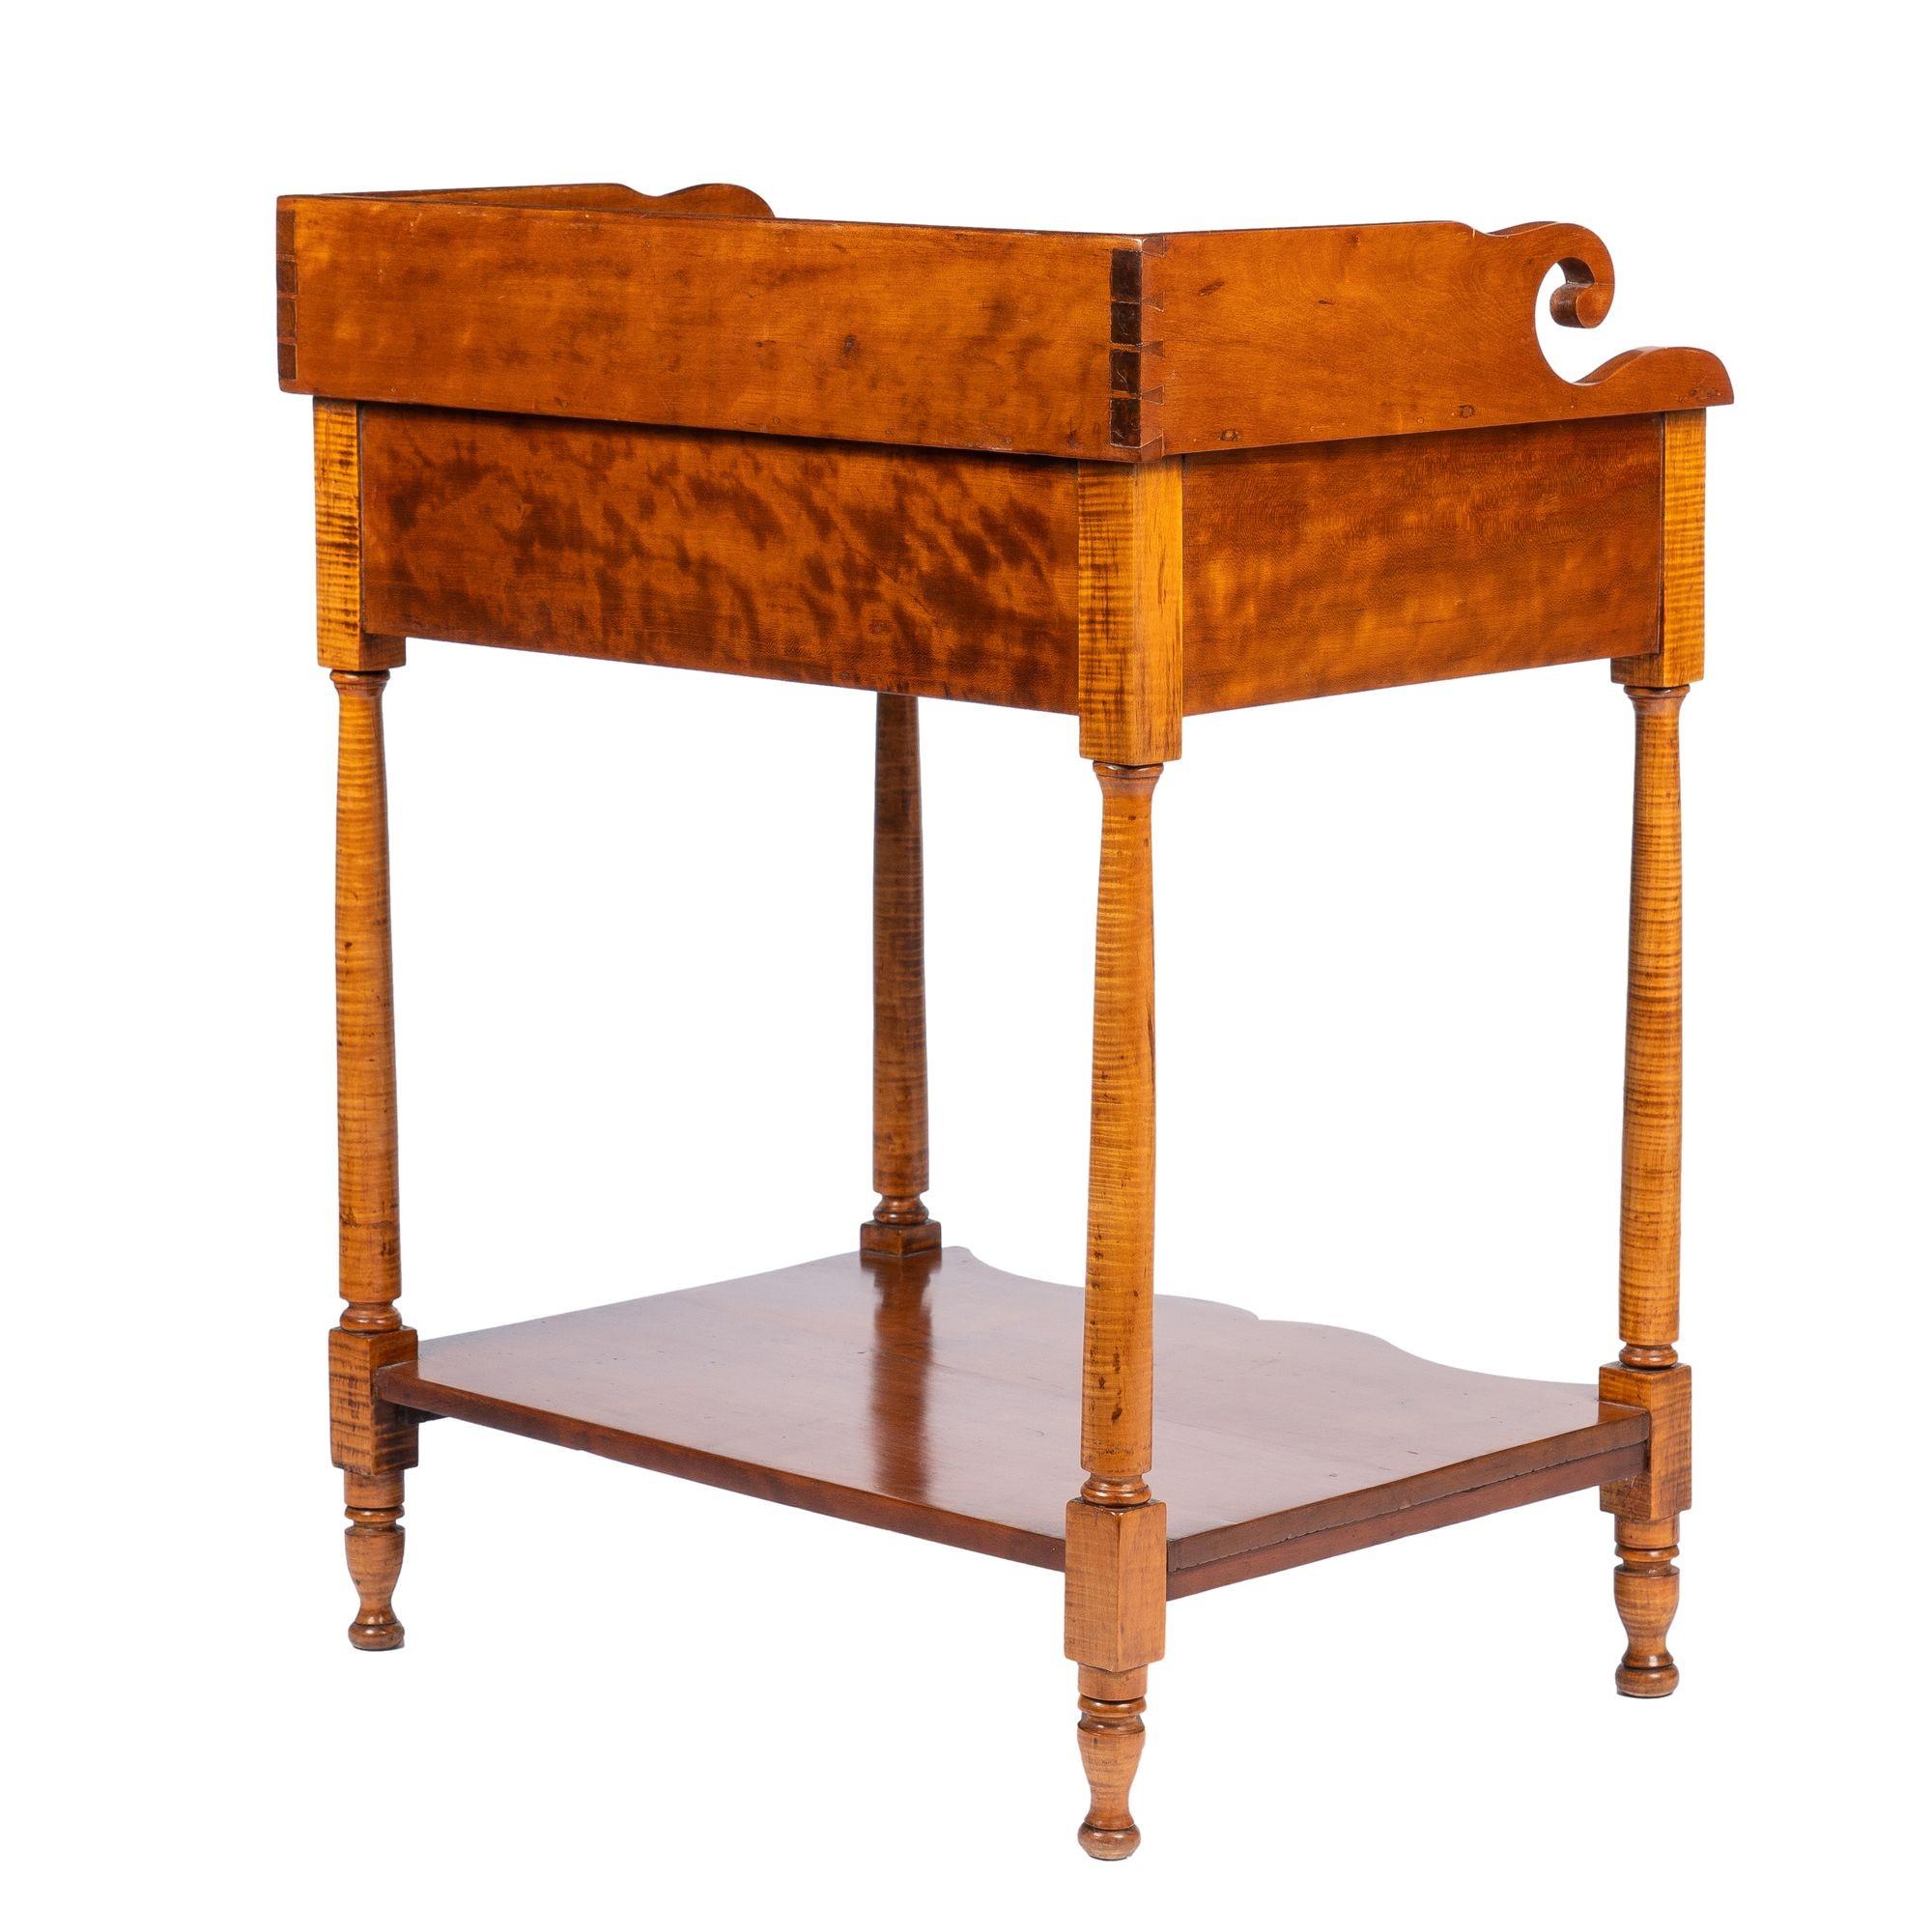 19th Century Philadelphia Cherry Wood Stand with Splash on a Conforming Apron, 1820 For Sale